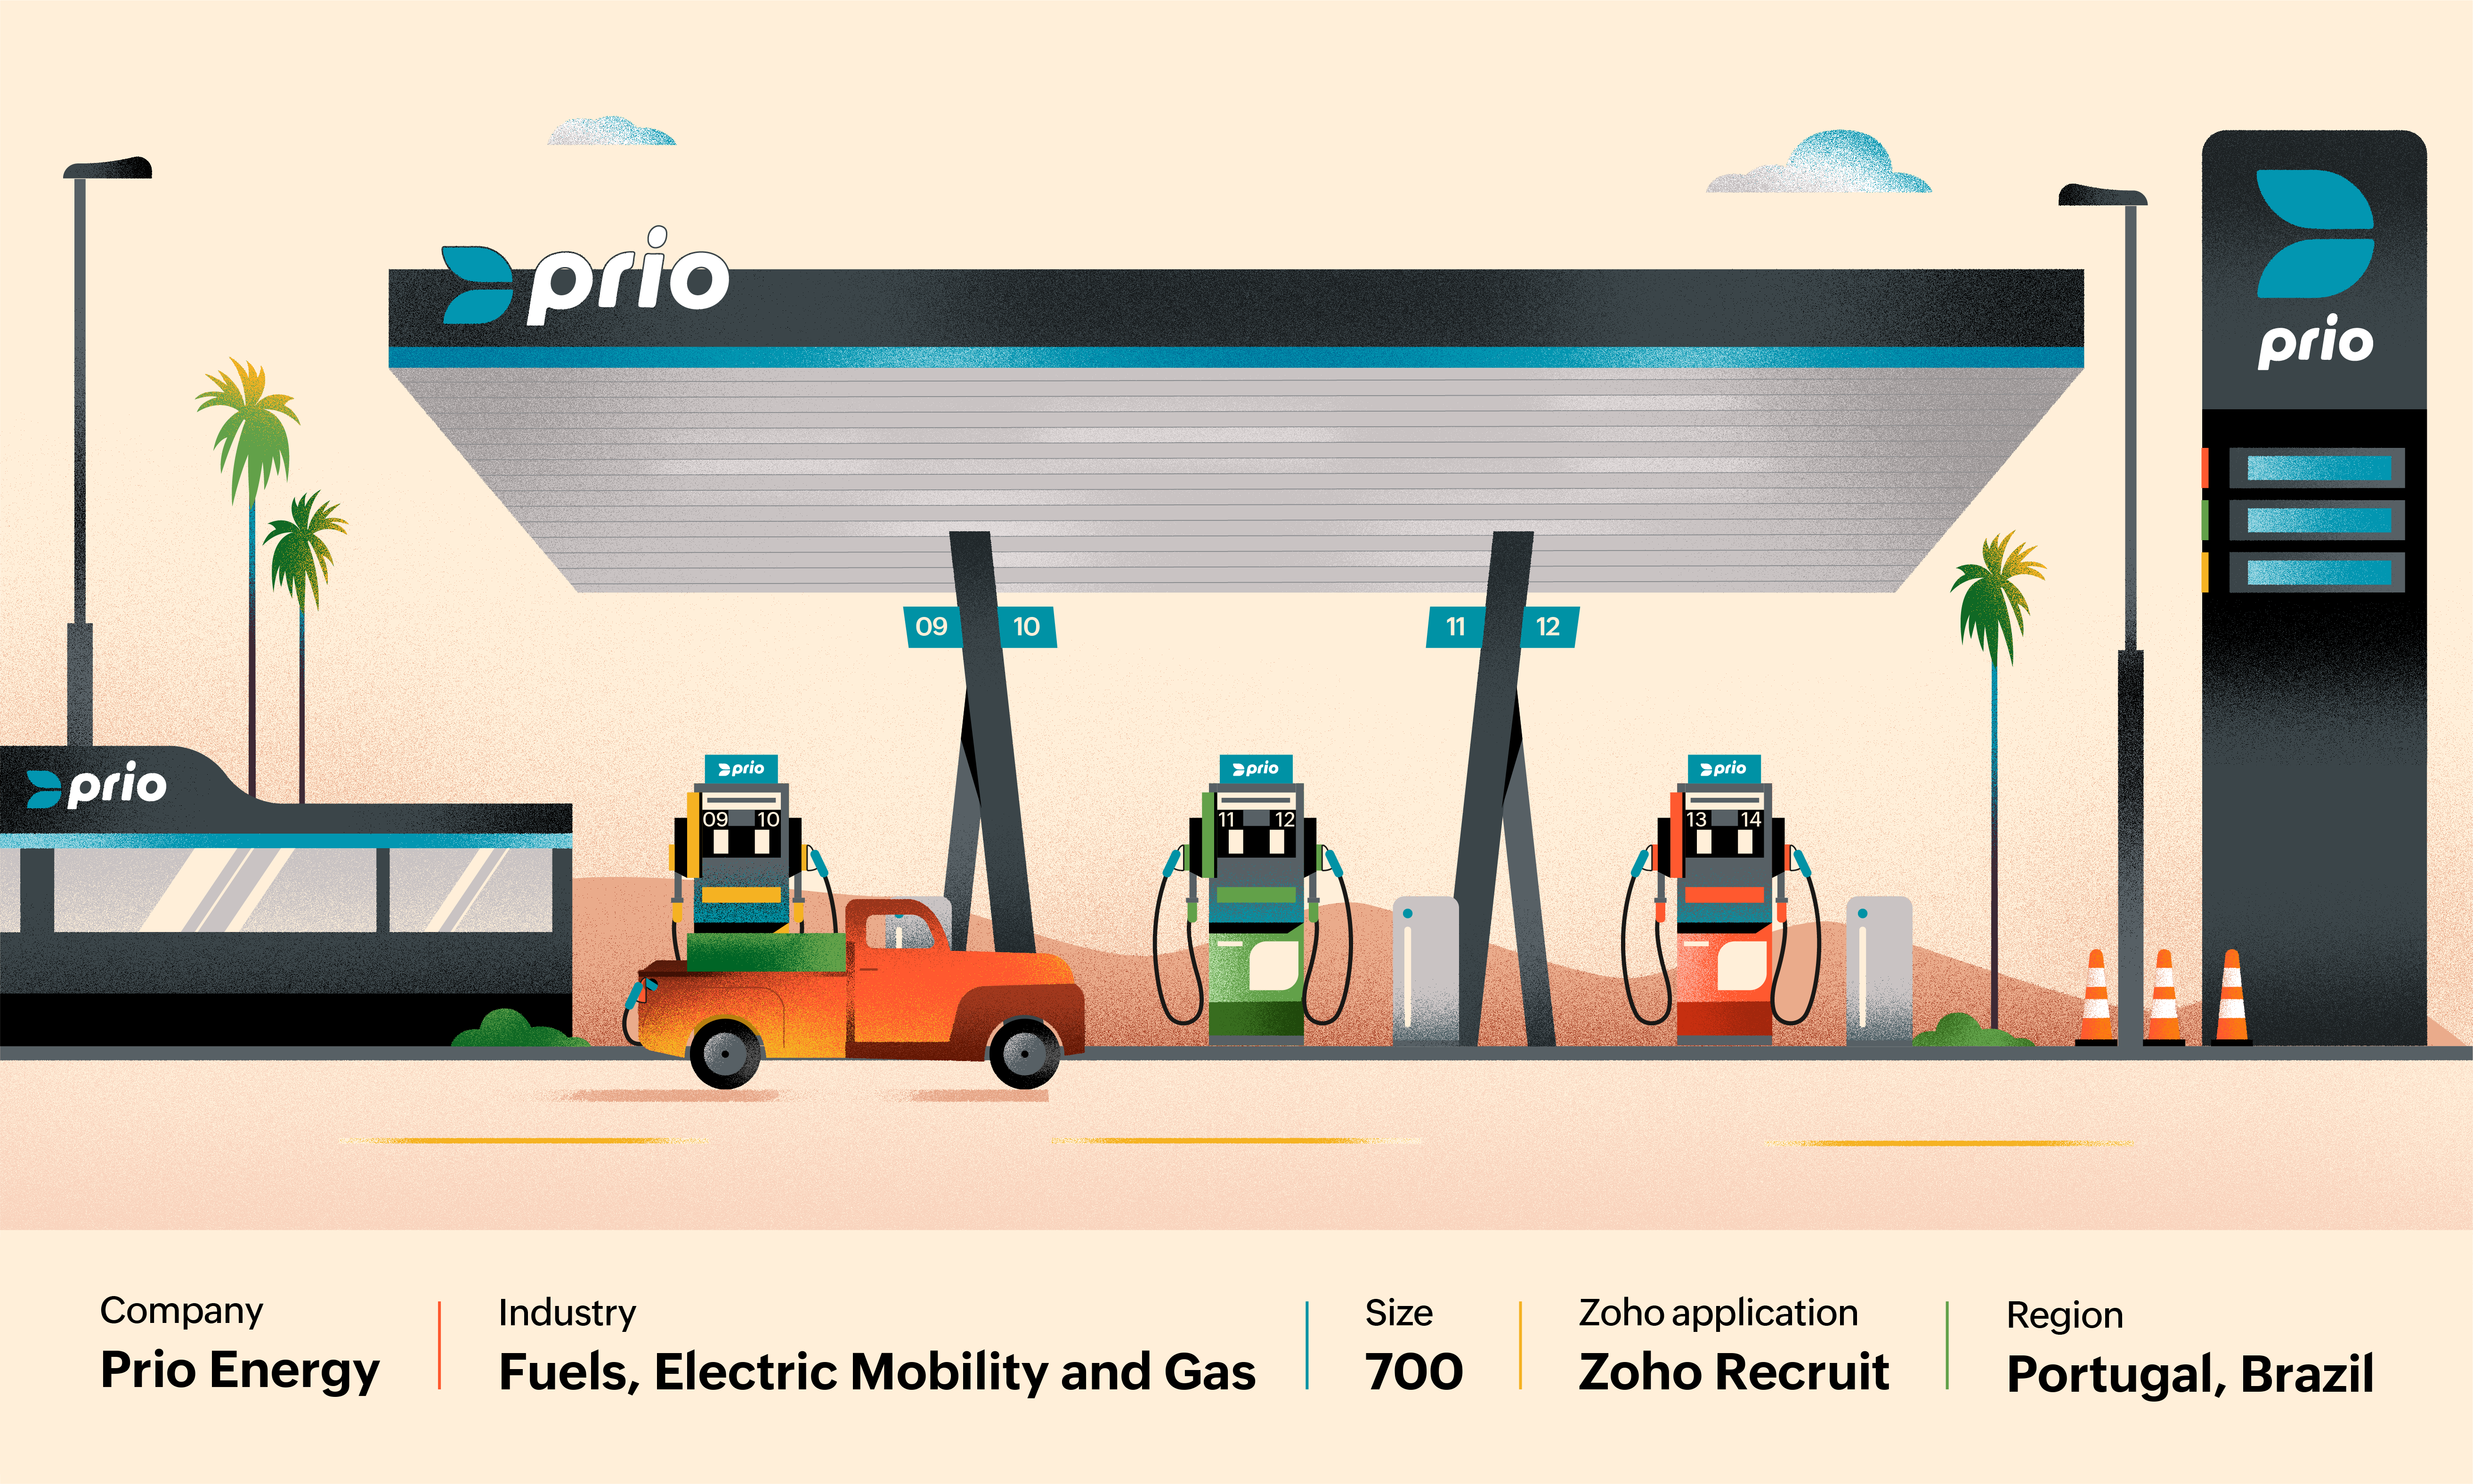 Business profilke of PRIO. Energy company producing and distributing fuels, electric mobility and gas in Portugal and Brazil.